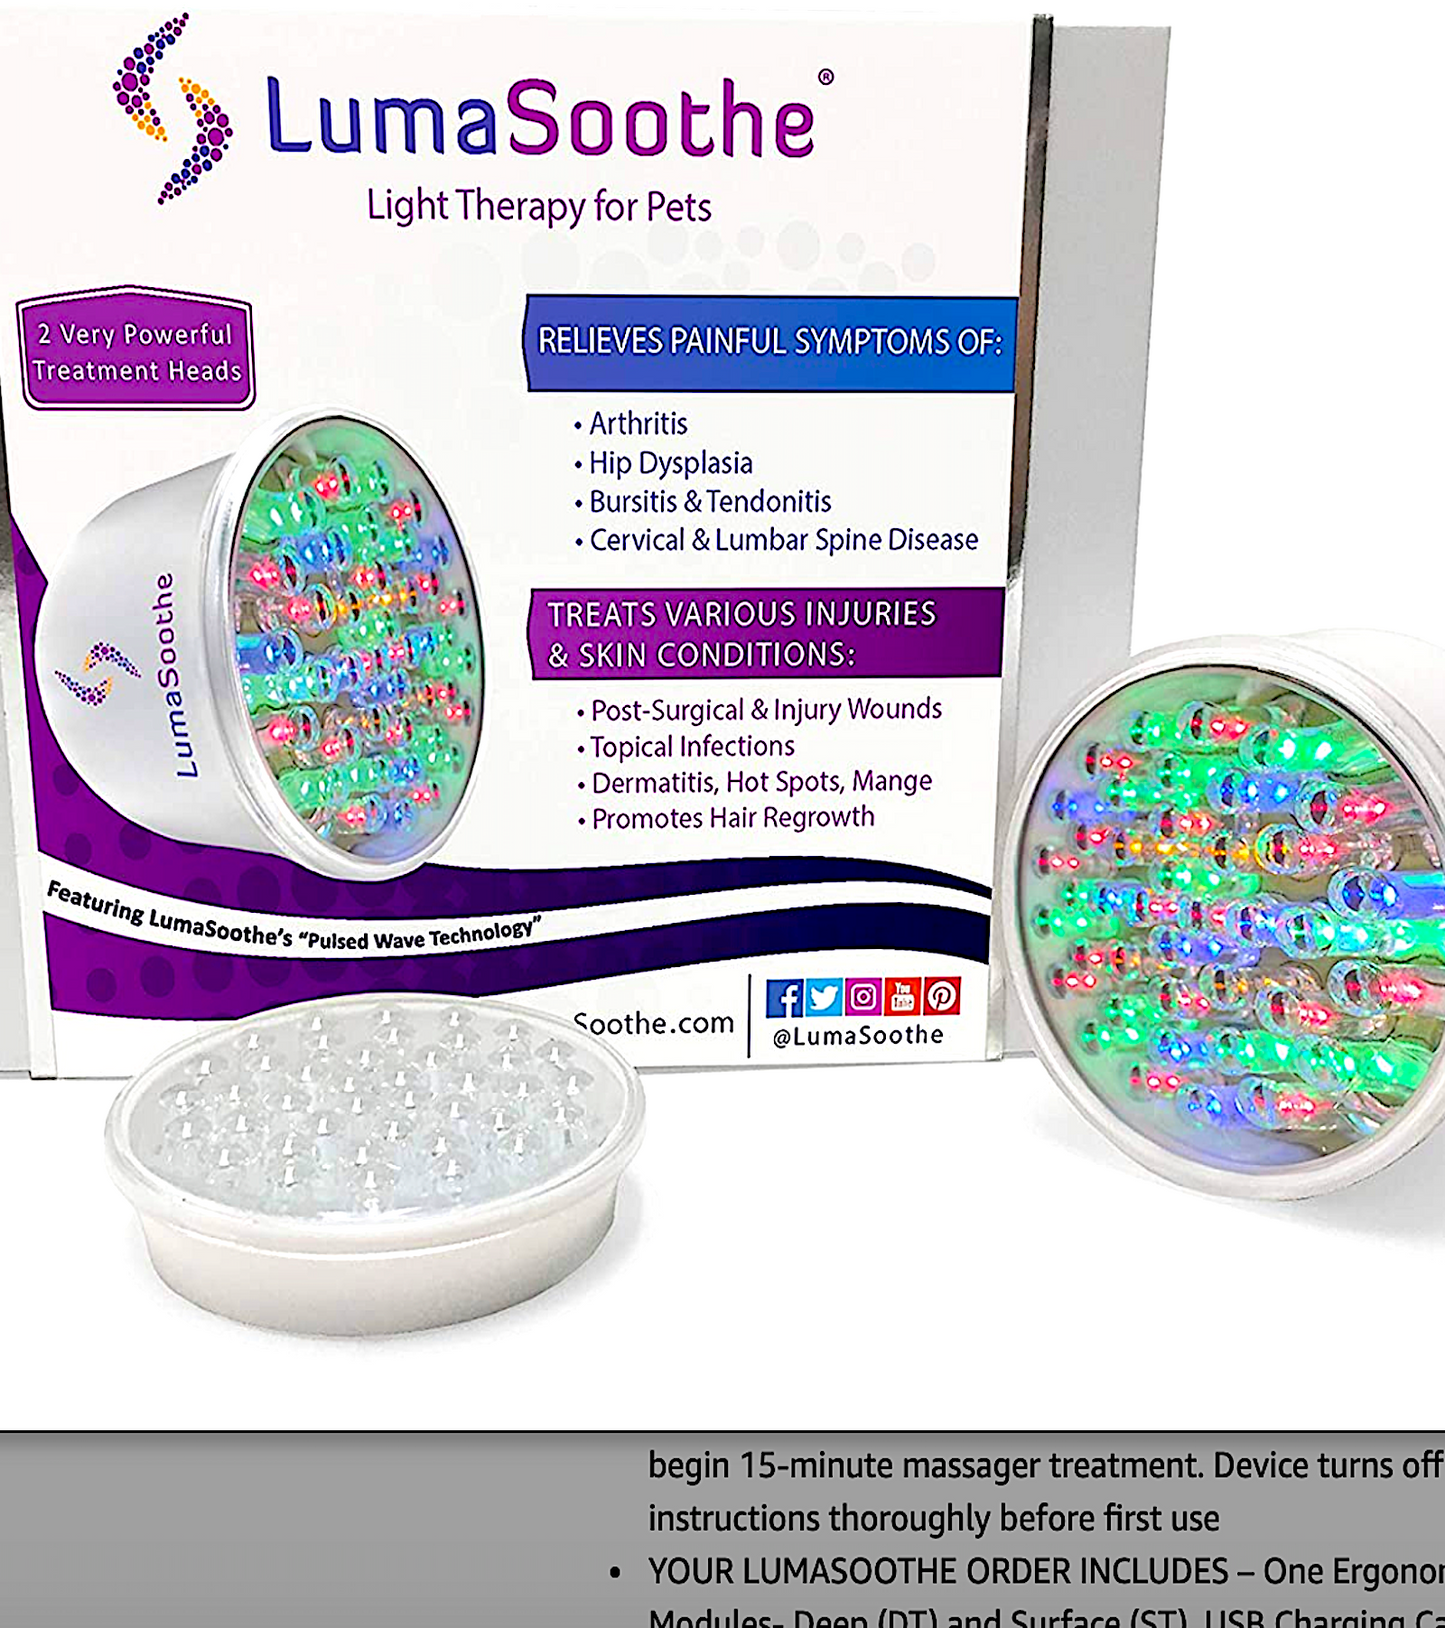 LUMASOOTHE AT HOME LIGHT THERAPY: Deep Muscle Pain and Arthritis Relief for Dogs - Vital Vet